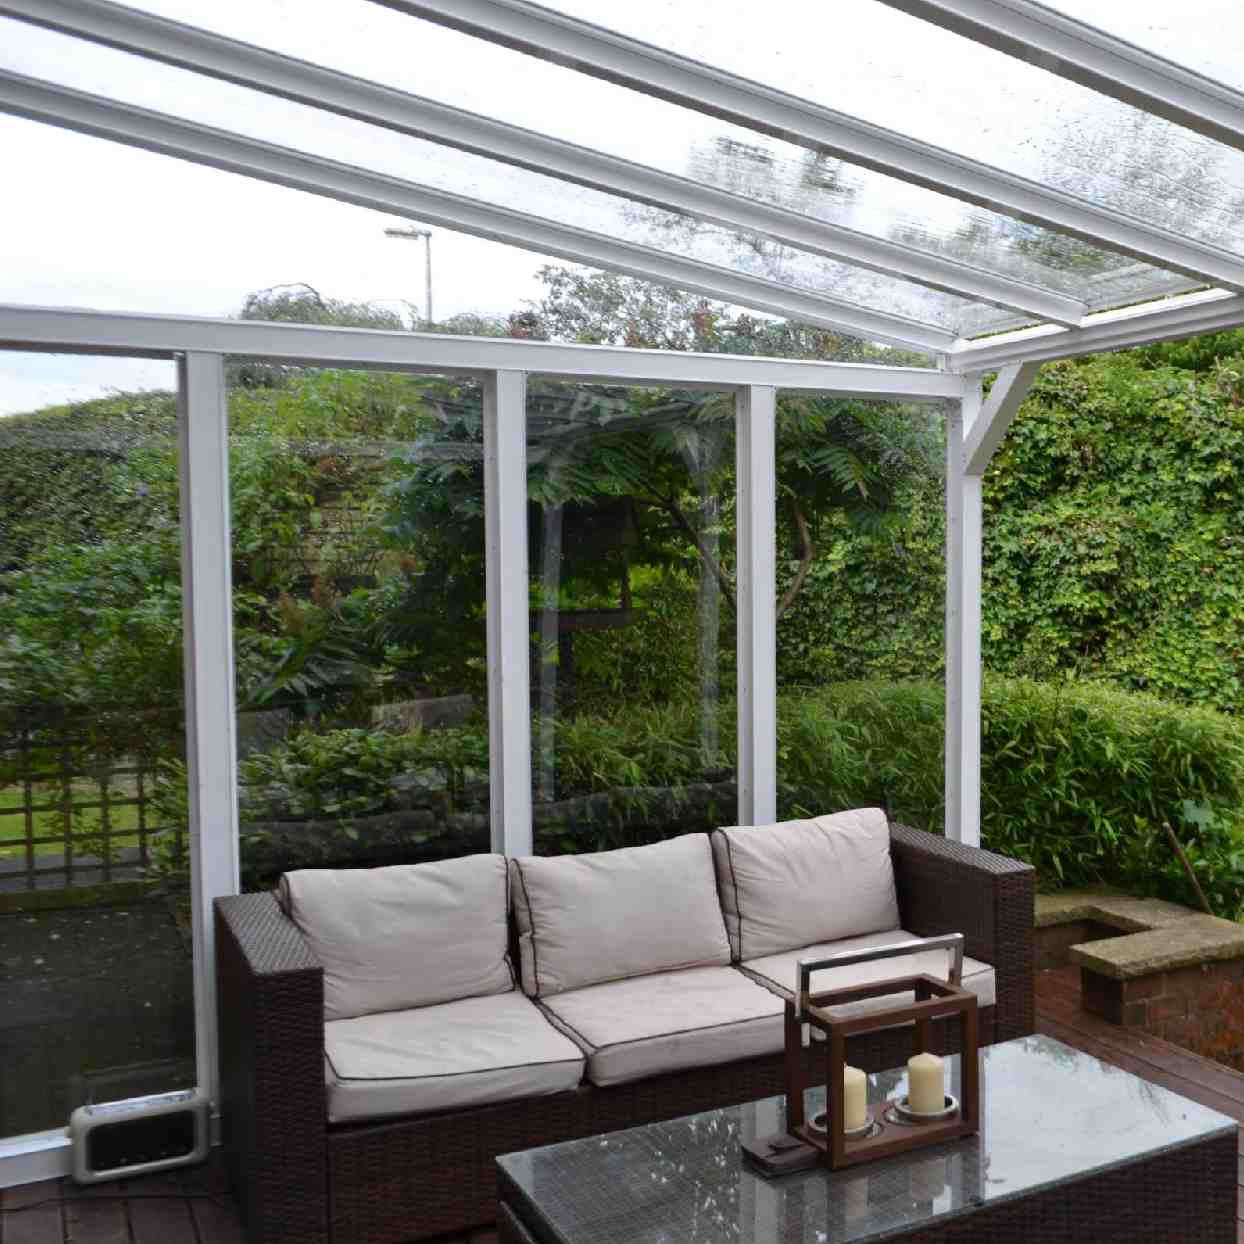 Buy Omega Verandah White with 16mm Polycarbonate Glazing - 6.0m (W) x 3.0m (P), (3) Supporting Posts online today